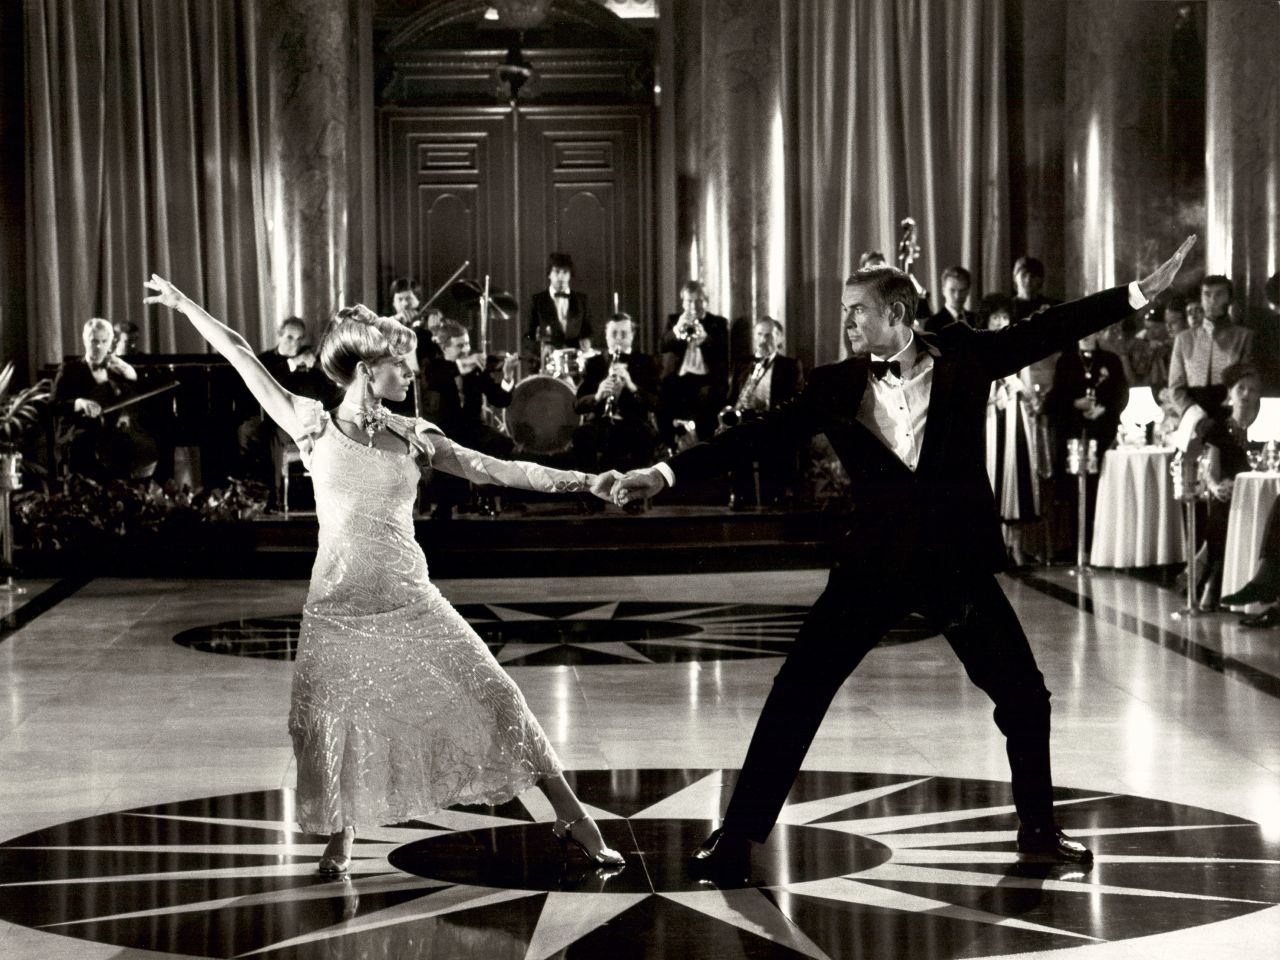 Connery dances with Kim Basinger in a scene from the 1983 film "Never Say Never Again," his last film as Bond.